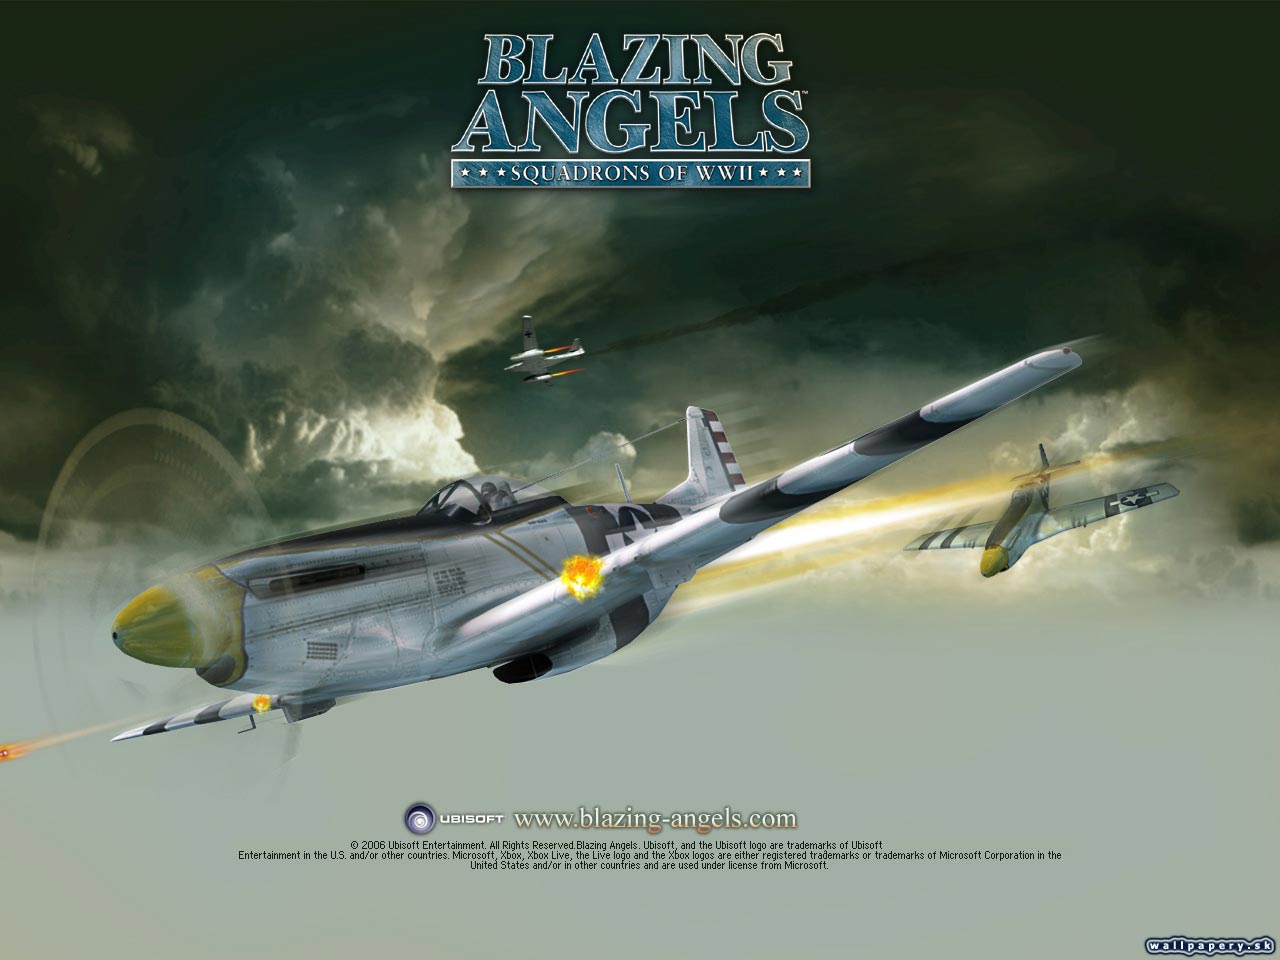 Blazing Angels: Squadrons of WWII - wallpaper 5